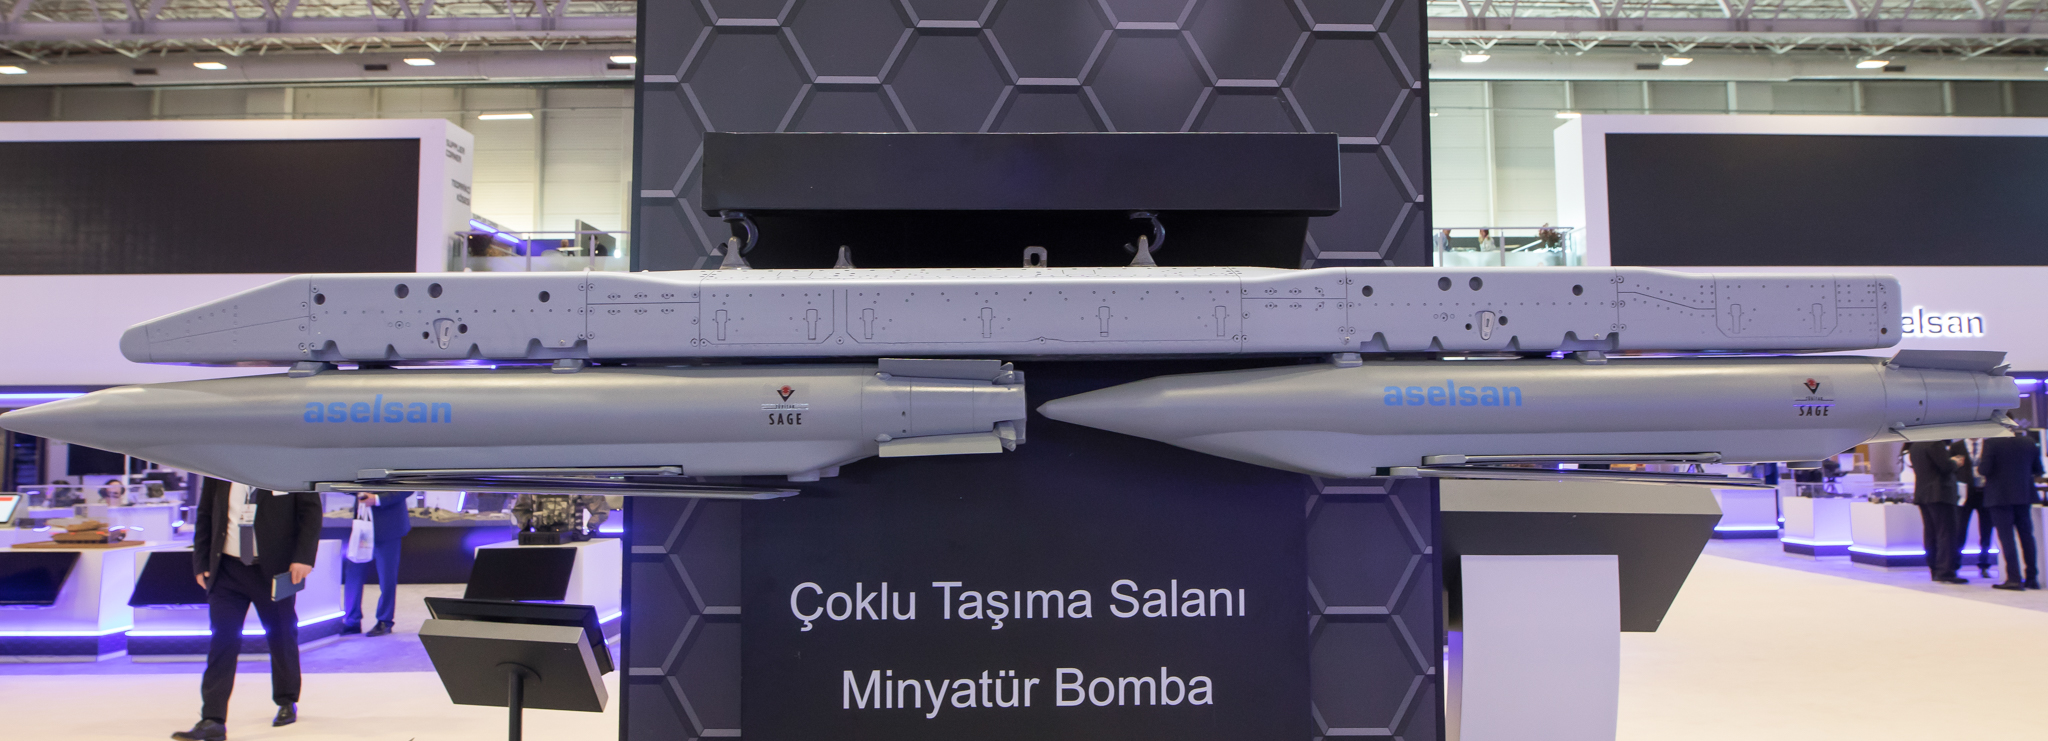 Negotiations Started with Aselsan for the Serial Production Phase of the National SDB (Small Diameter Bomb) Project!